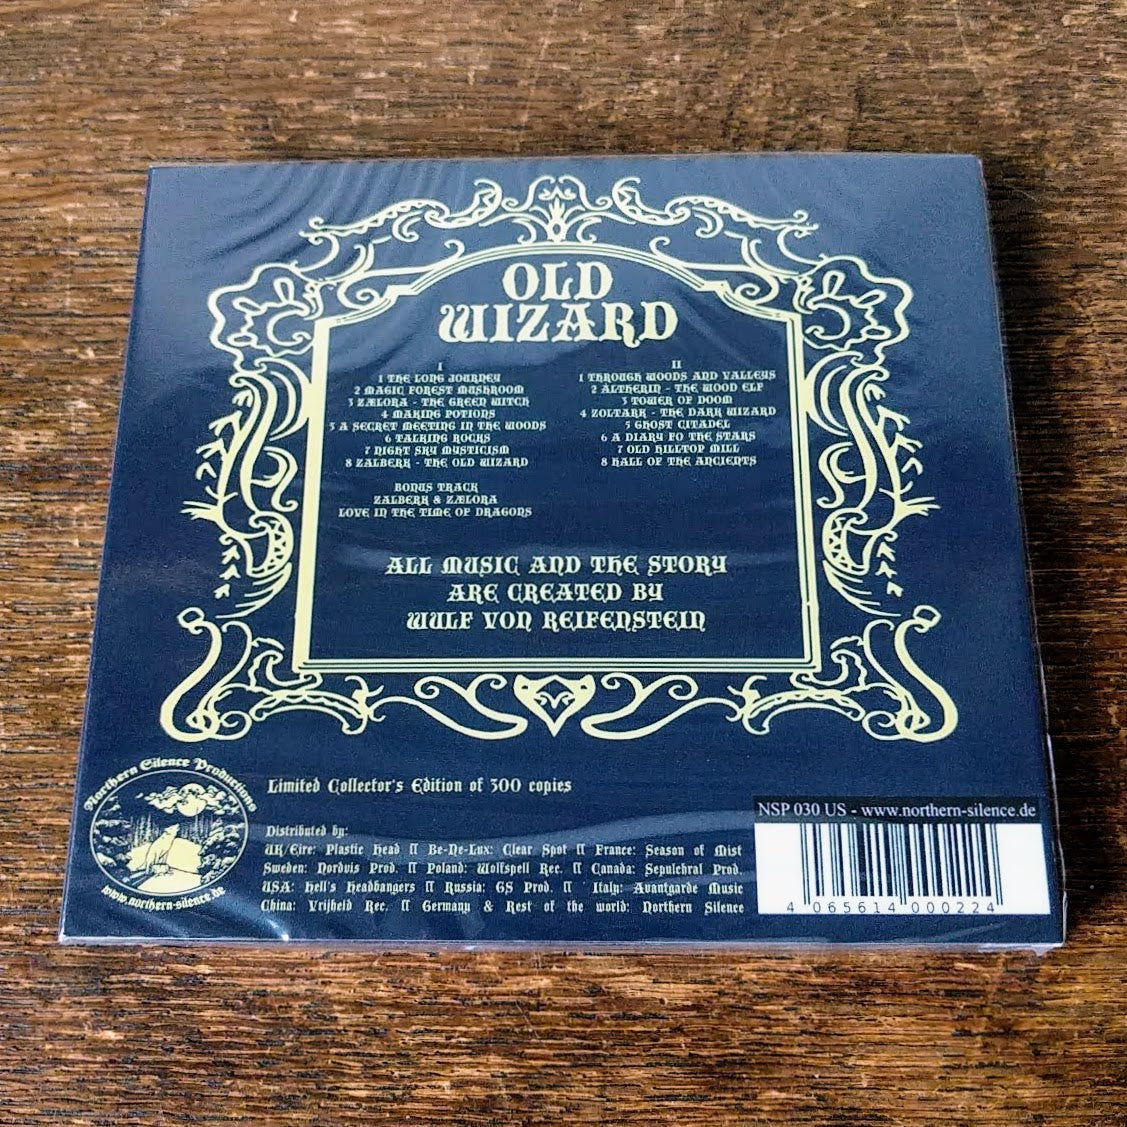 [SOLD OUT] OLD WIZARD "I & II" double CD [2xCD digipak] (lim.300)